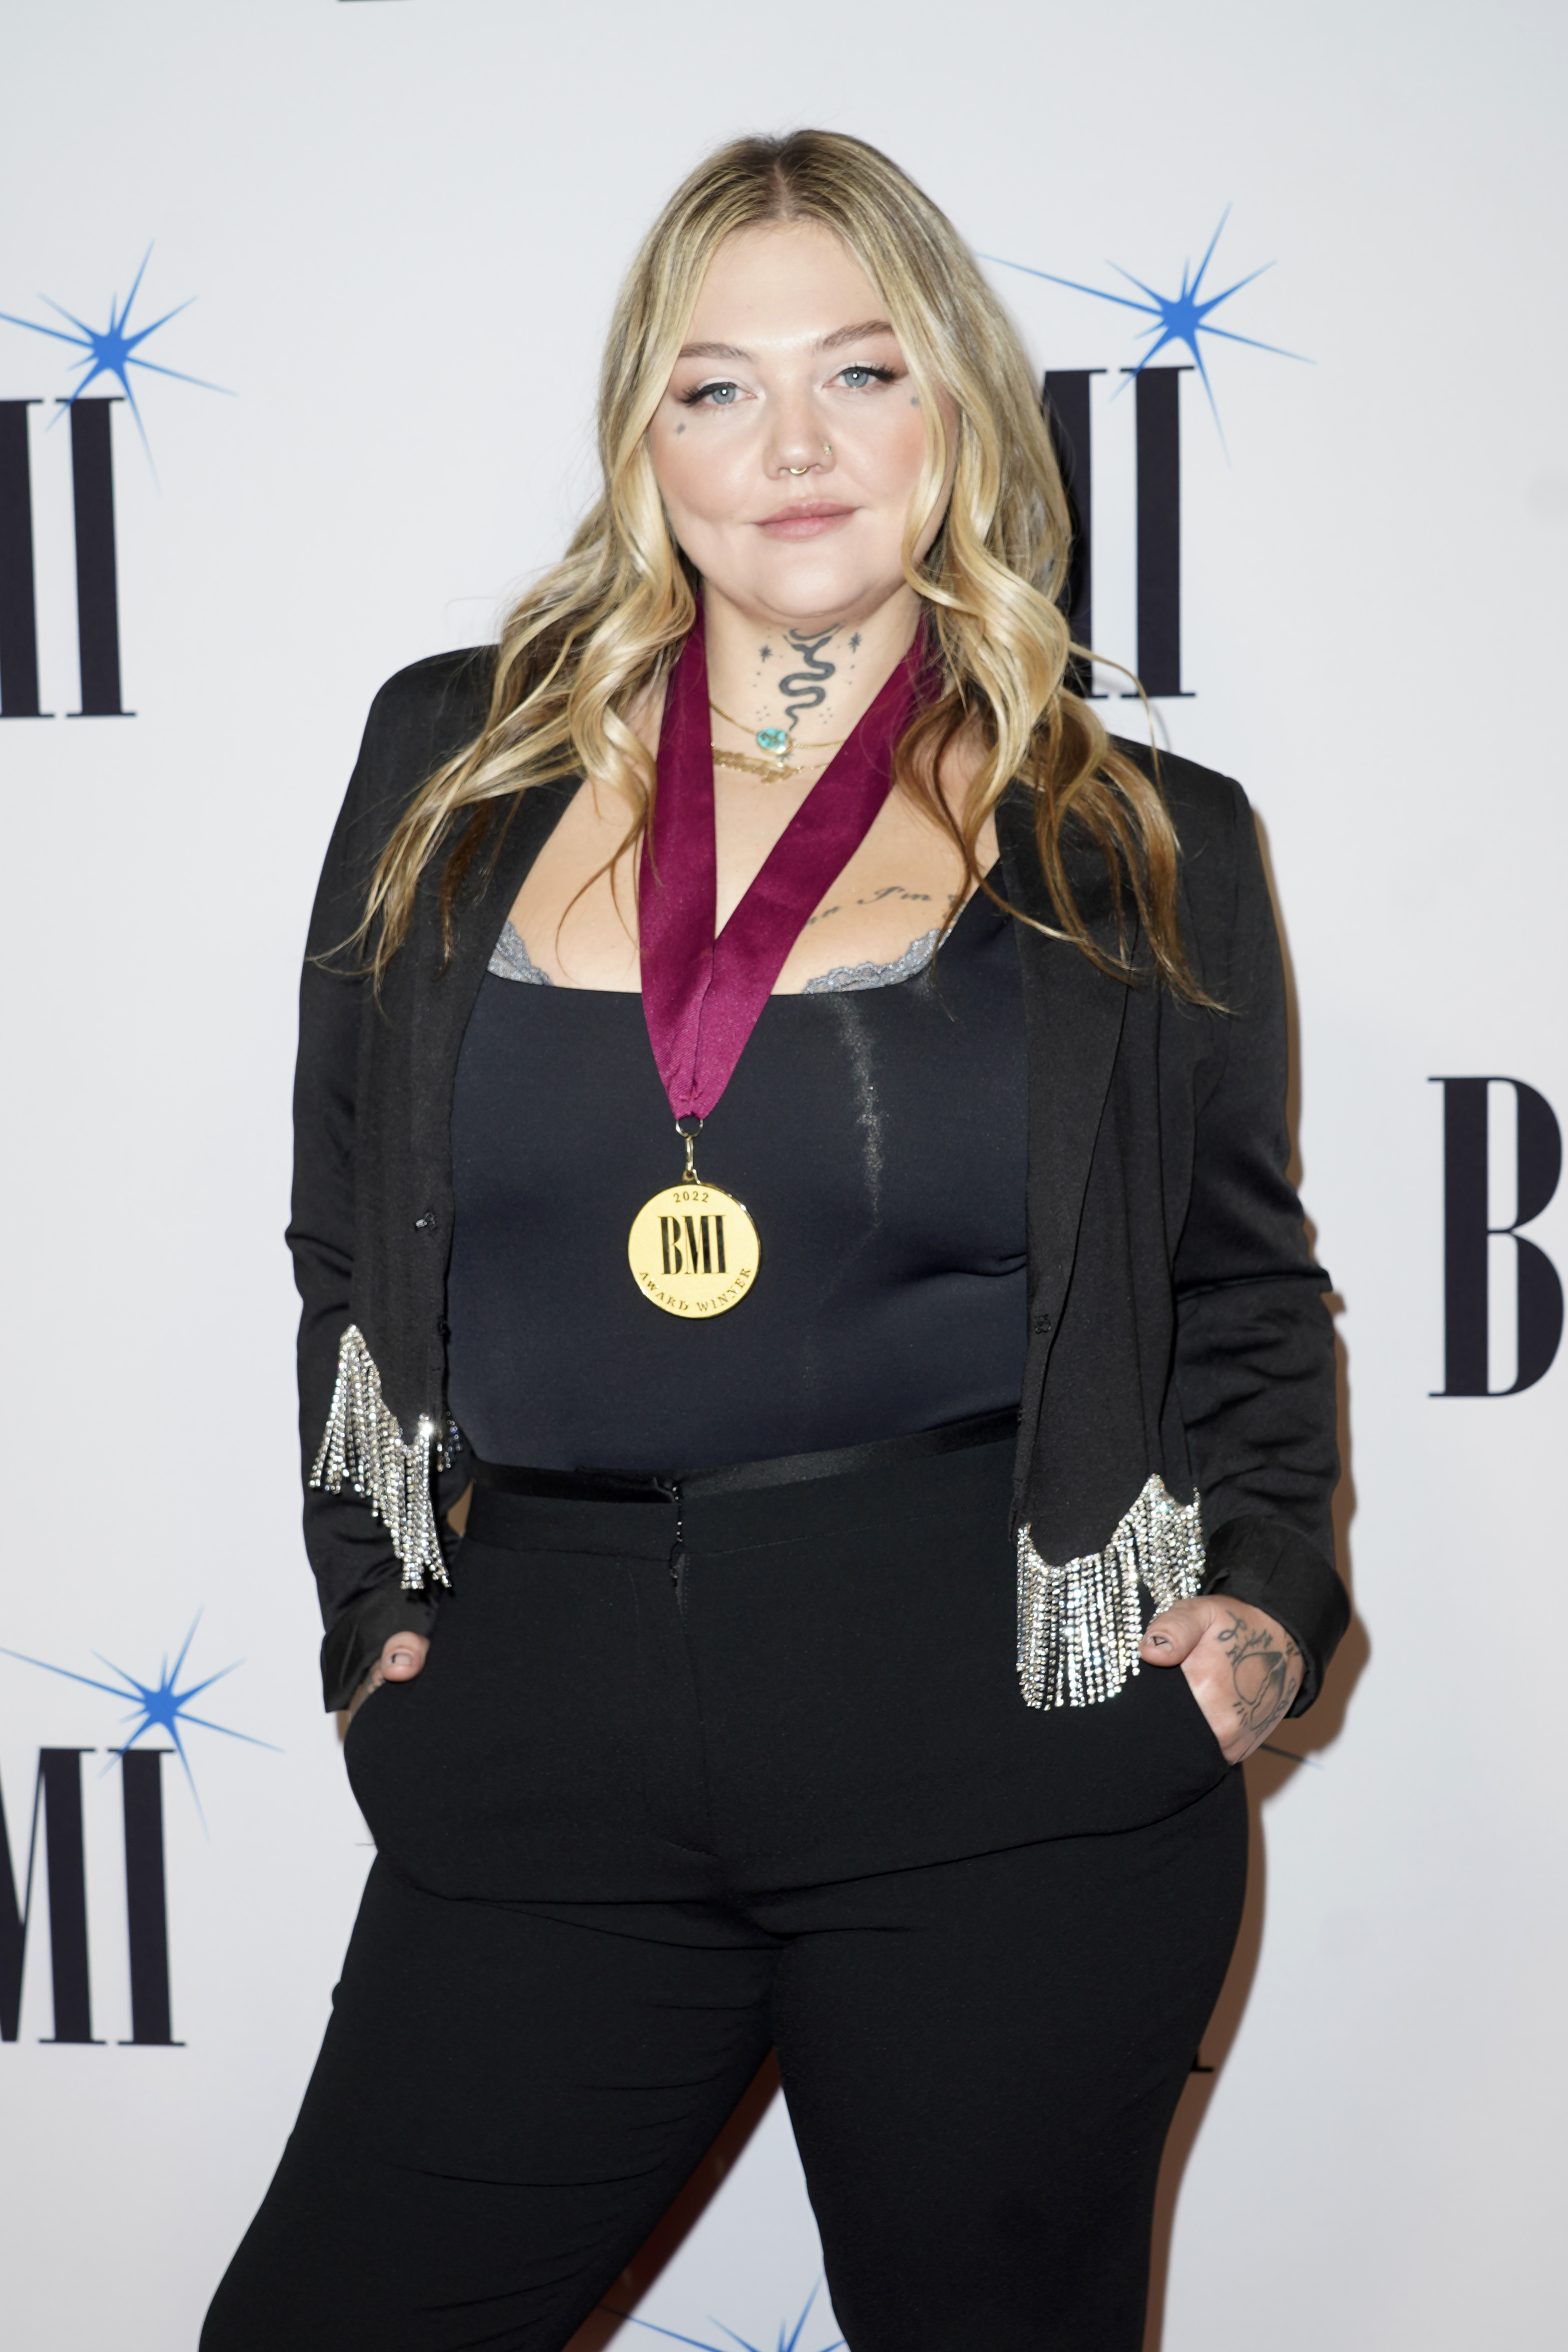 Elle King at the BMI Country Awards in Nashville, Tennessee on November 8, 2022 | Source: Getty Images